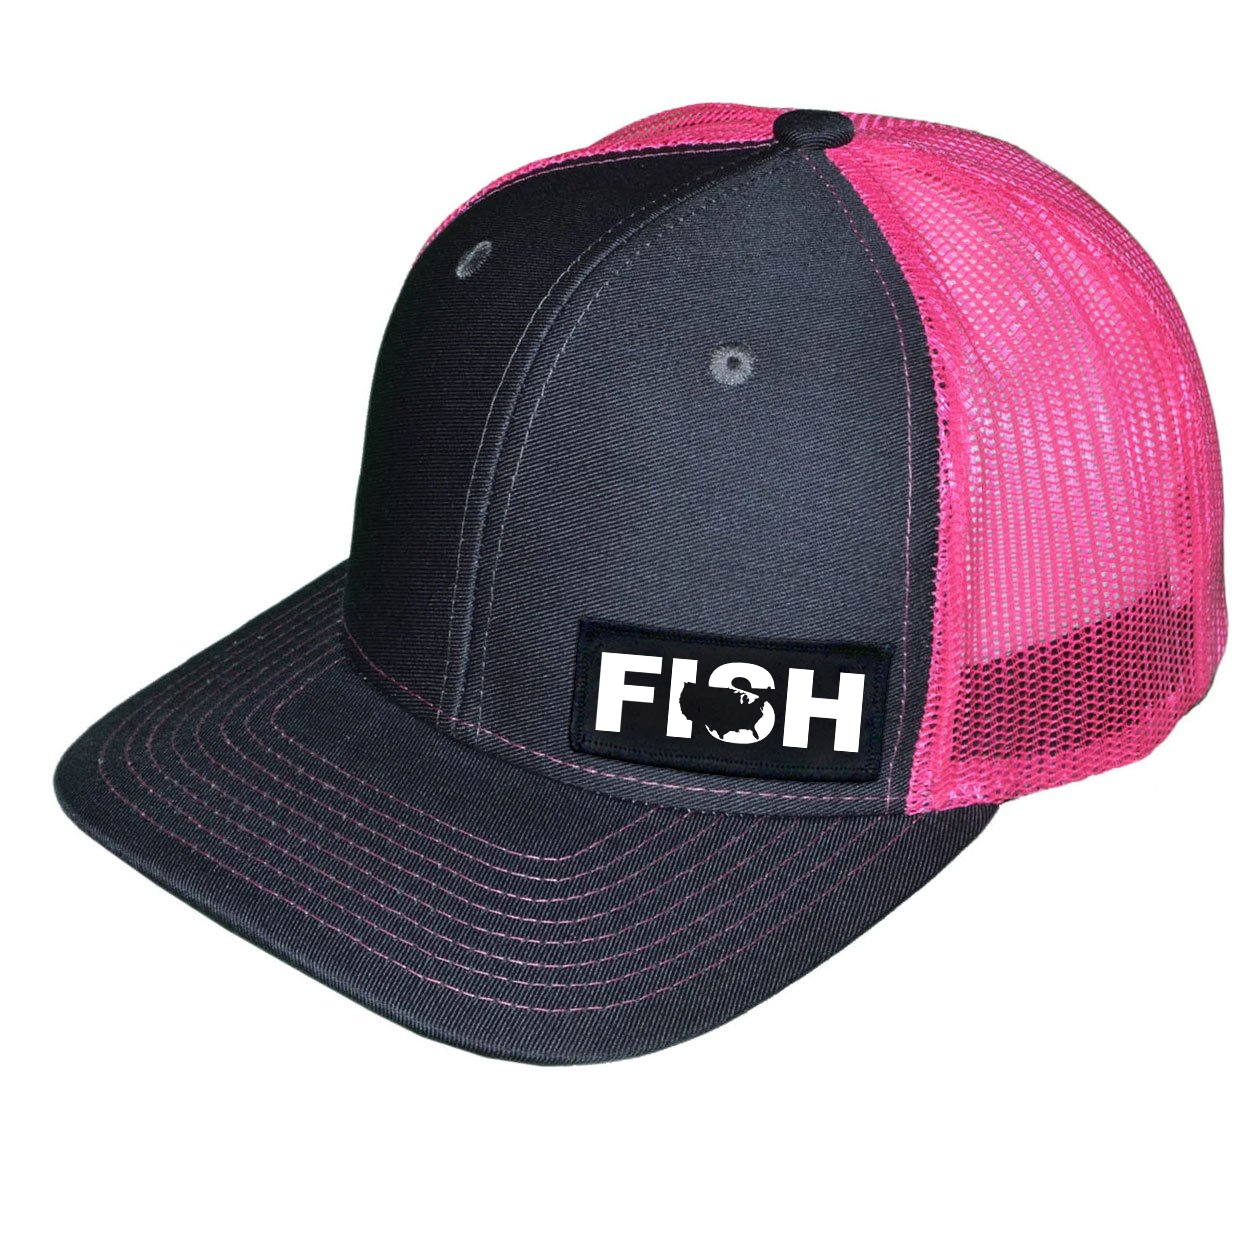 Fish United States Night Out Woven Patch Snapback Trucker Hat Dark Gray/Neon Pink (White Logo)